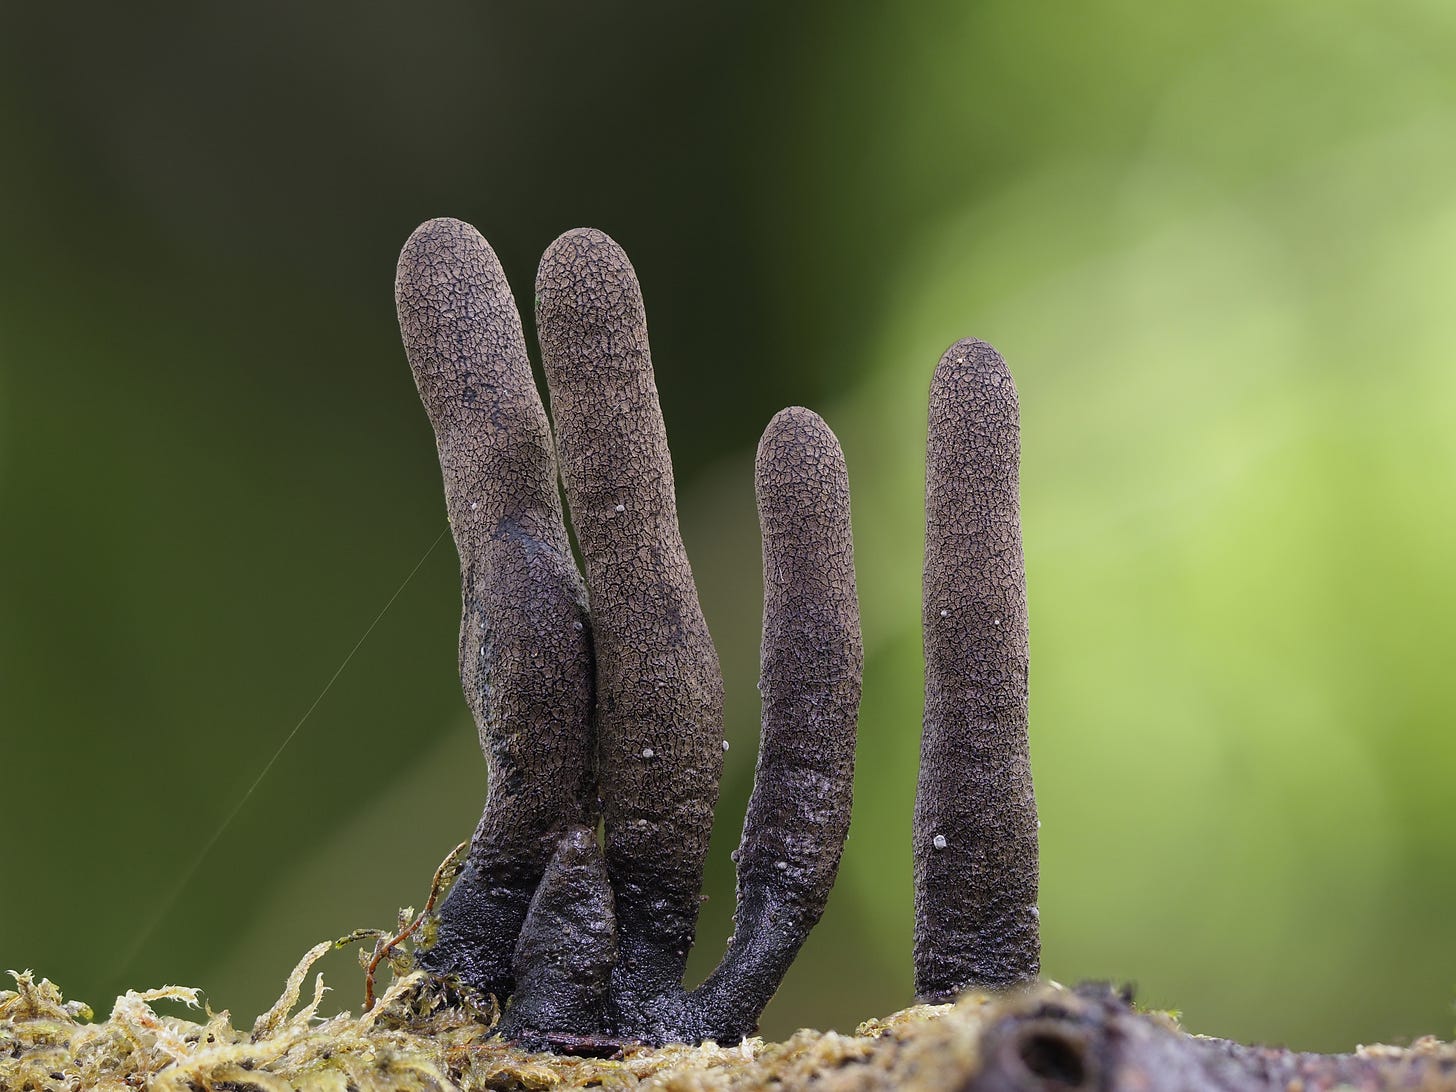 Xylaria polymorpha / Dead Man’s Fingers